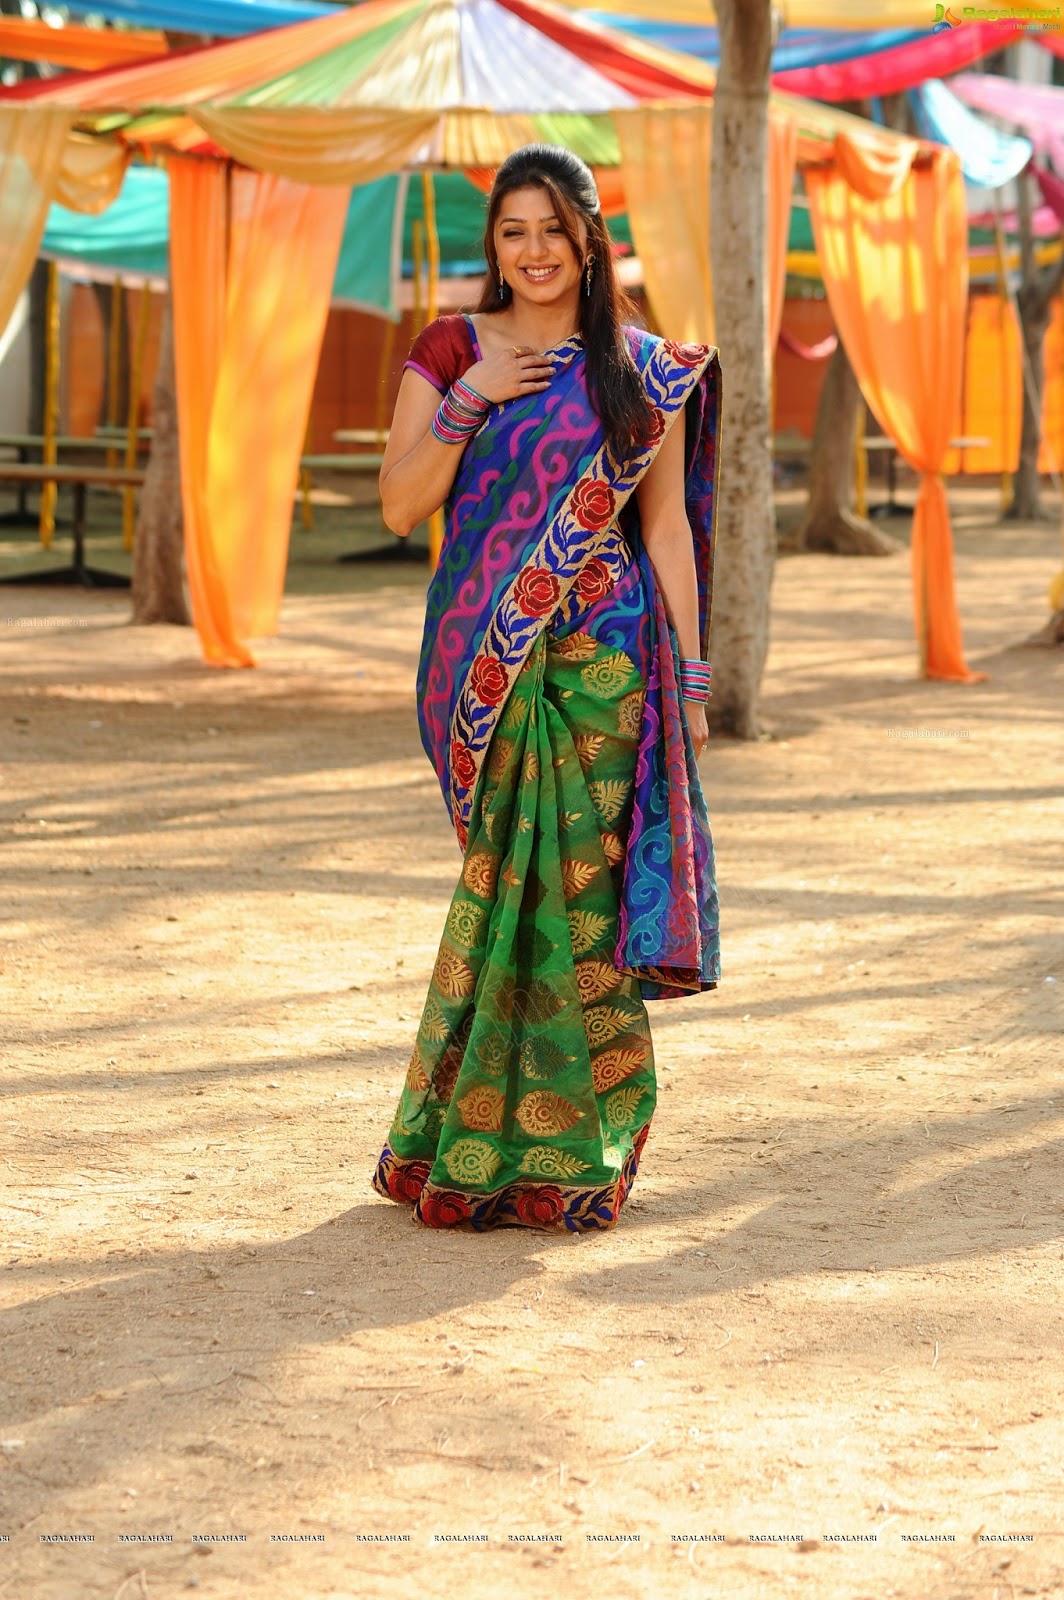 South Indian Half Saree Girls South Indian Homely Womens Photos